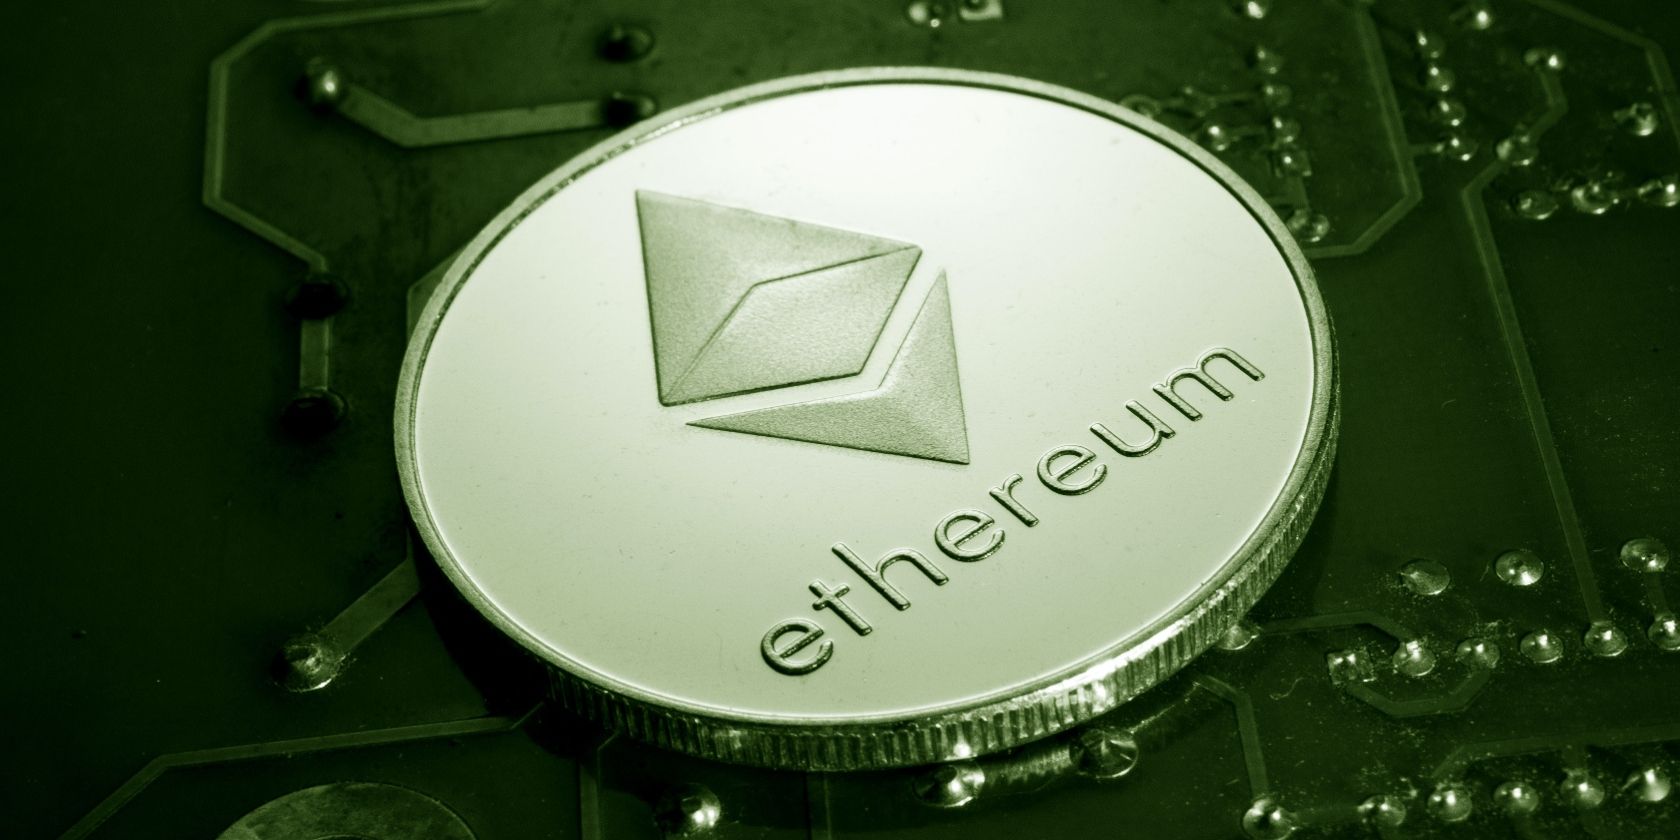 Quick start guide to mine ethereum bitcoin concepto